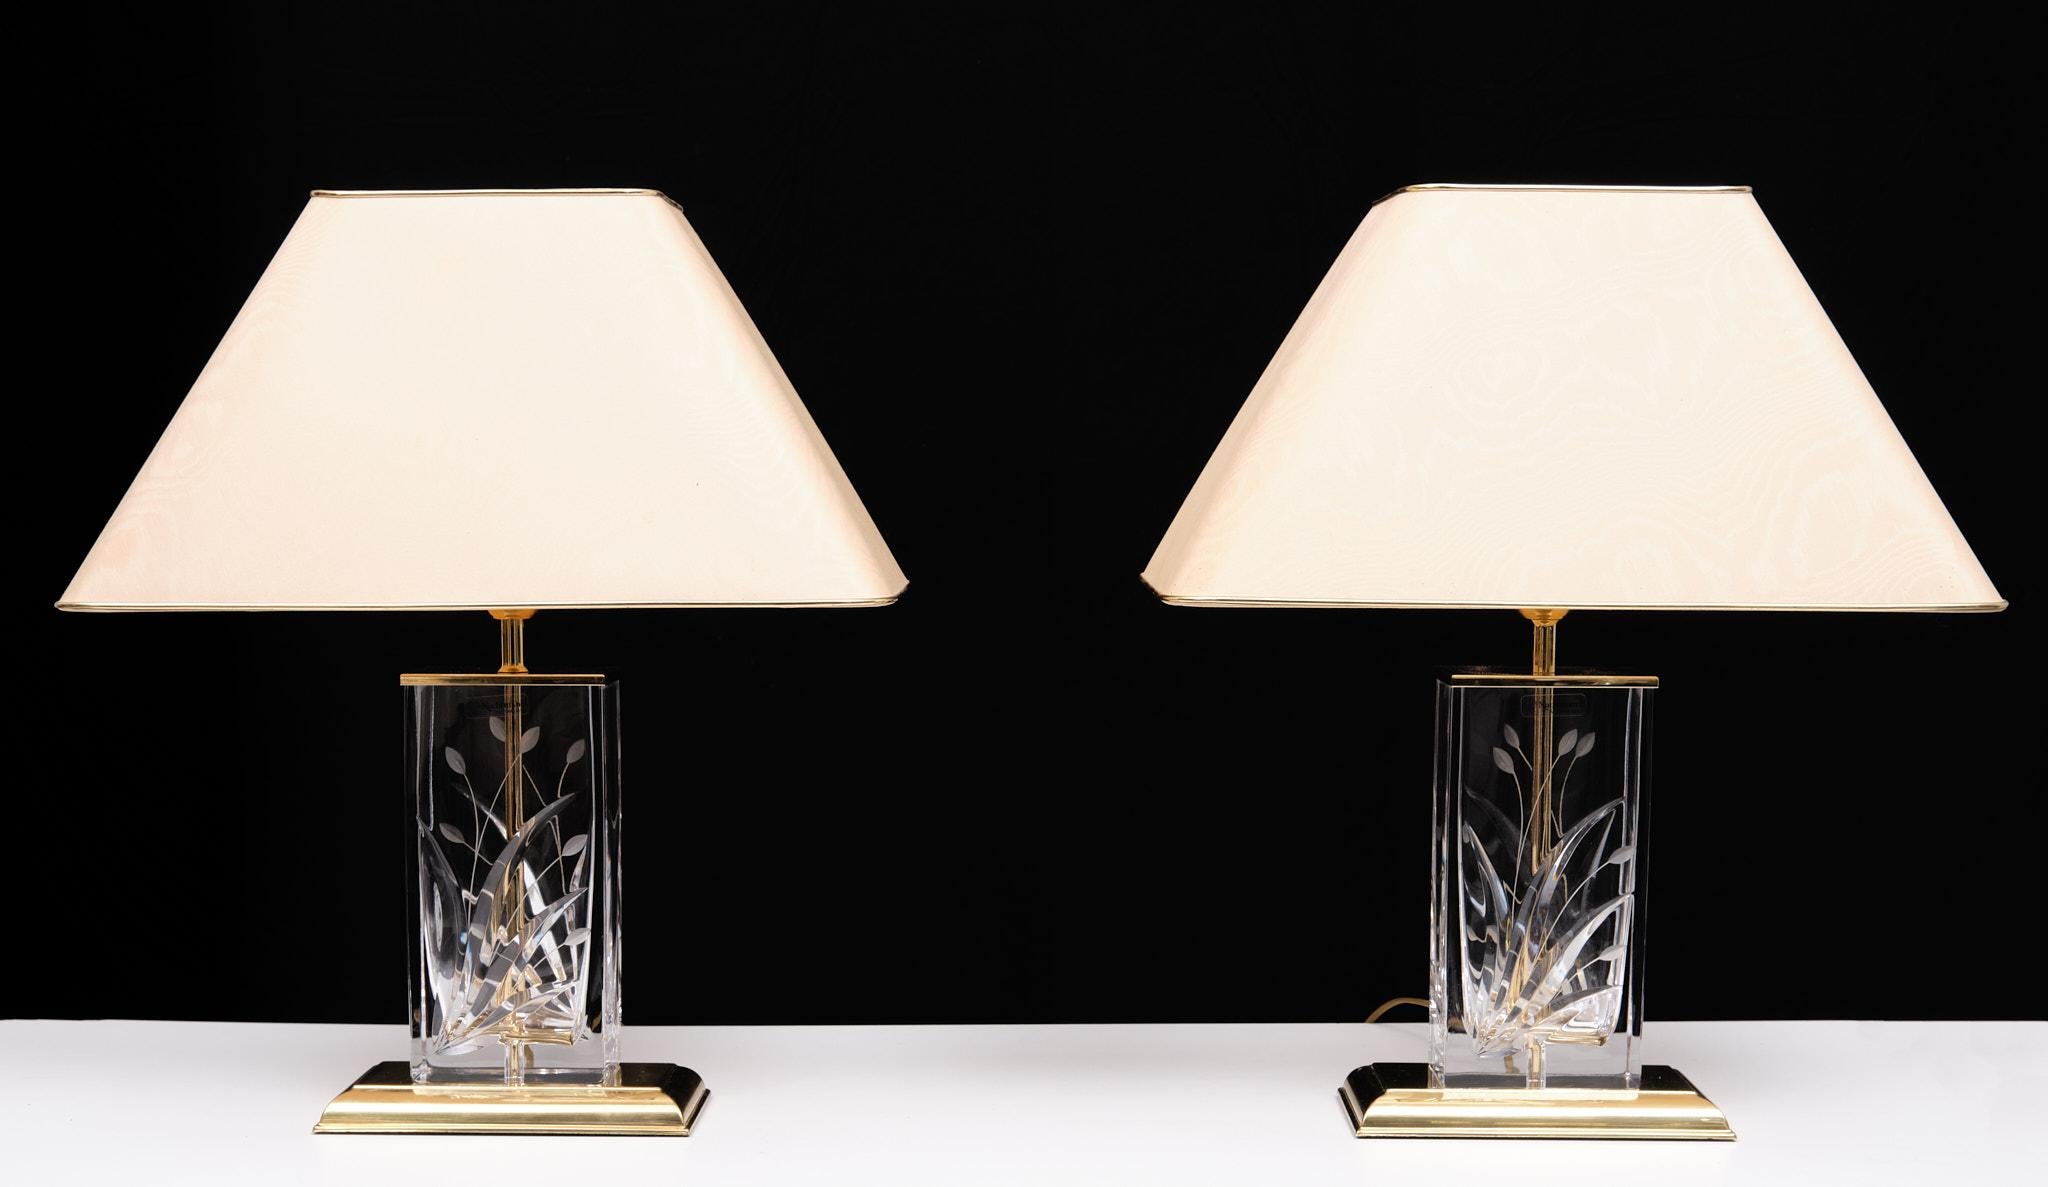 2 Beautiful identical Table lamps by Nachtmann Luechten Germany 1970s . 
Cut Crystal Glass , on a Brass base . Comes with the original shades . 
Good vintage condition . 